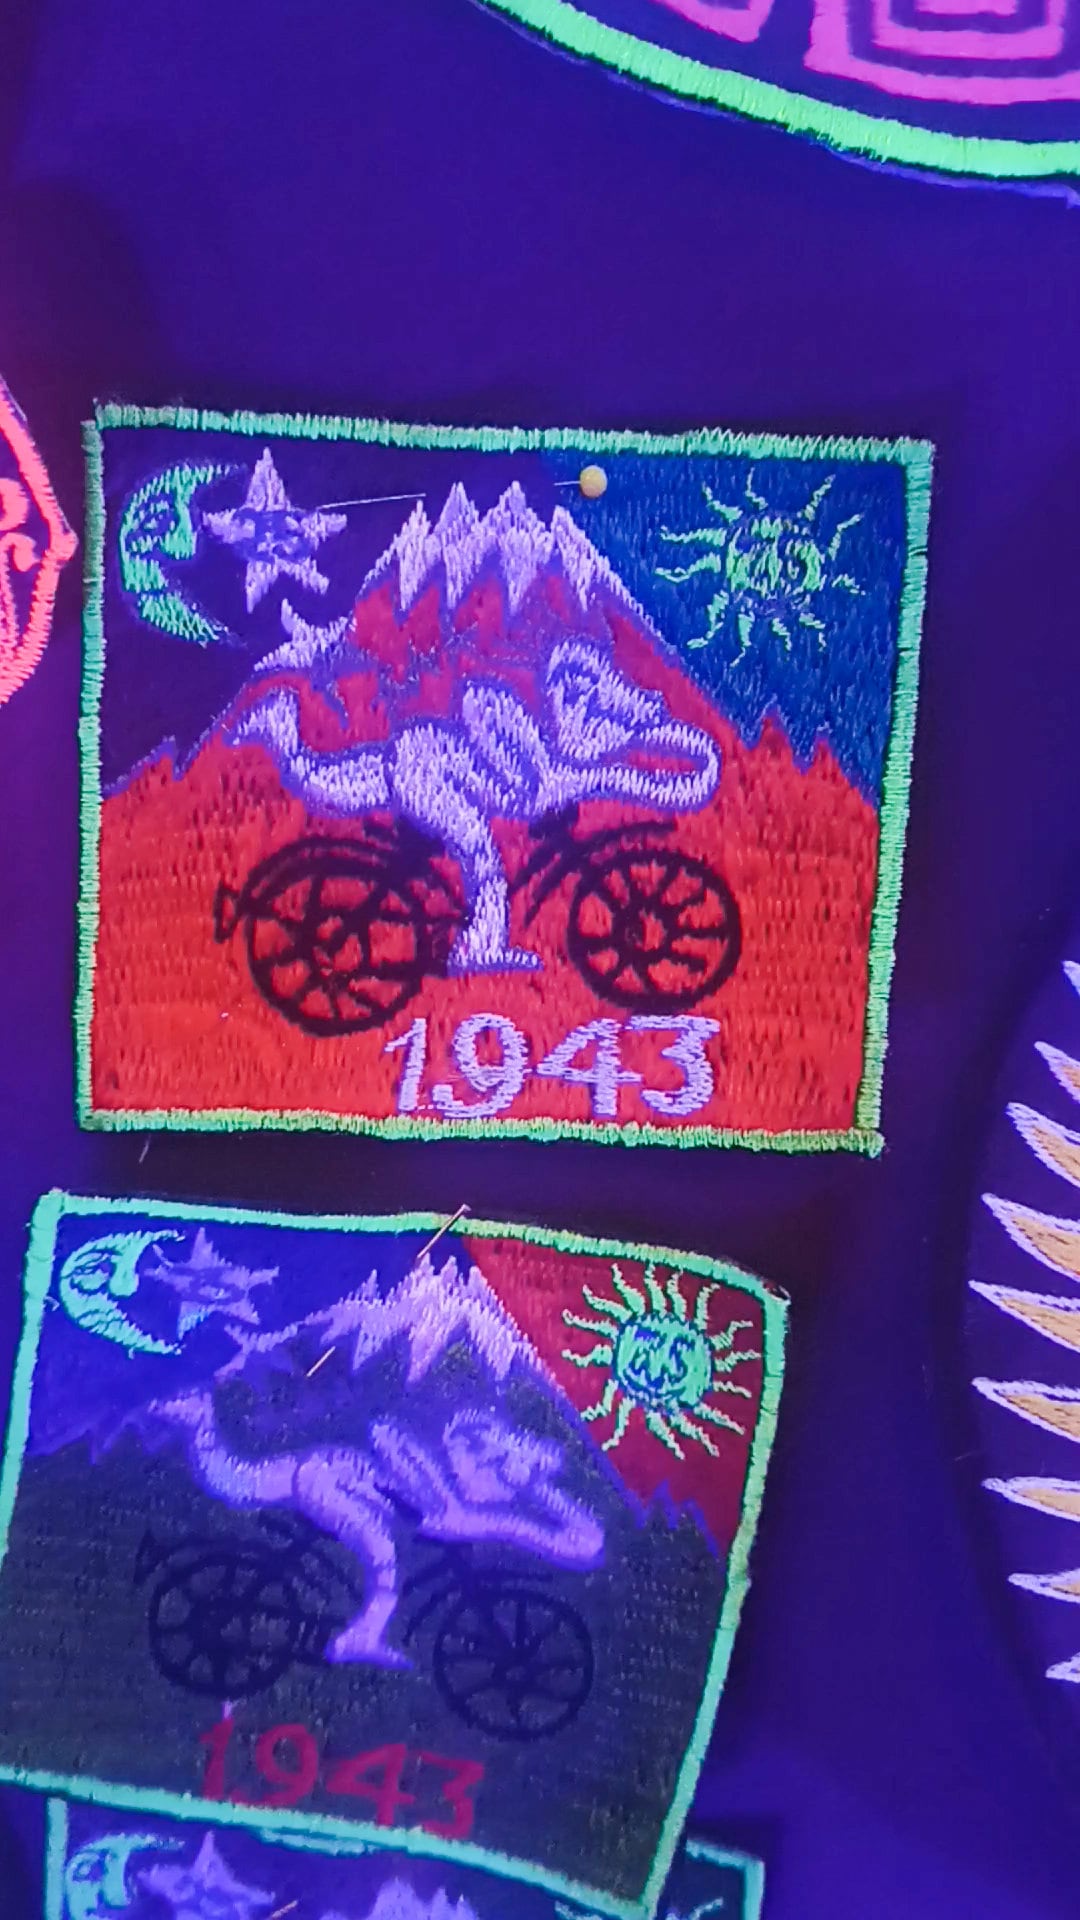 small Pink Bicycle Day Albert Hofmann 1943 LSD patch Psychedelic Trip Hippie Drug Timothy Leary Psychotherapy Divine Healing Medicine